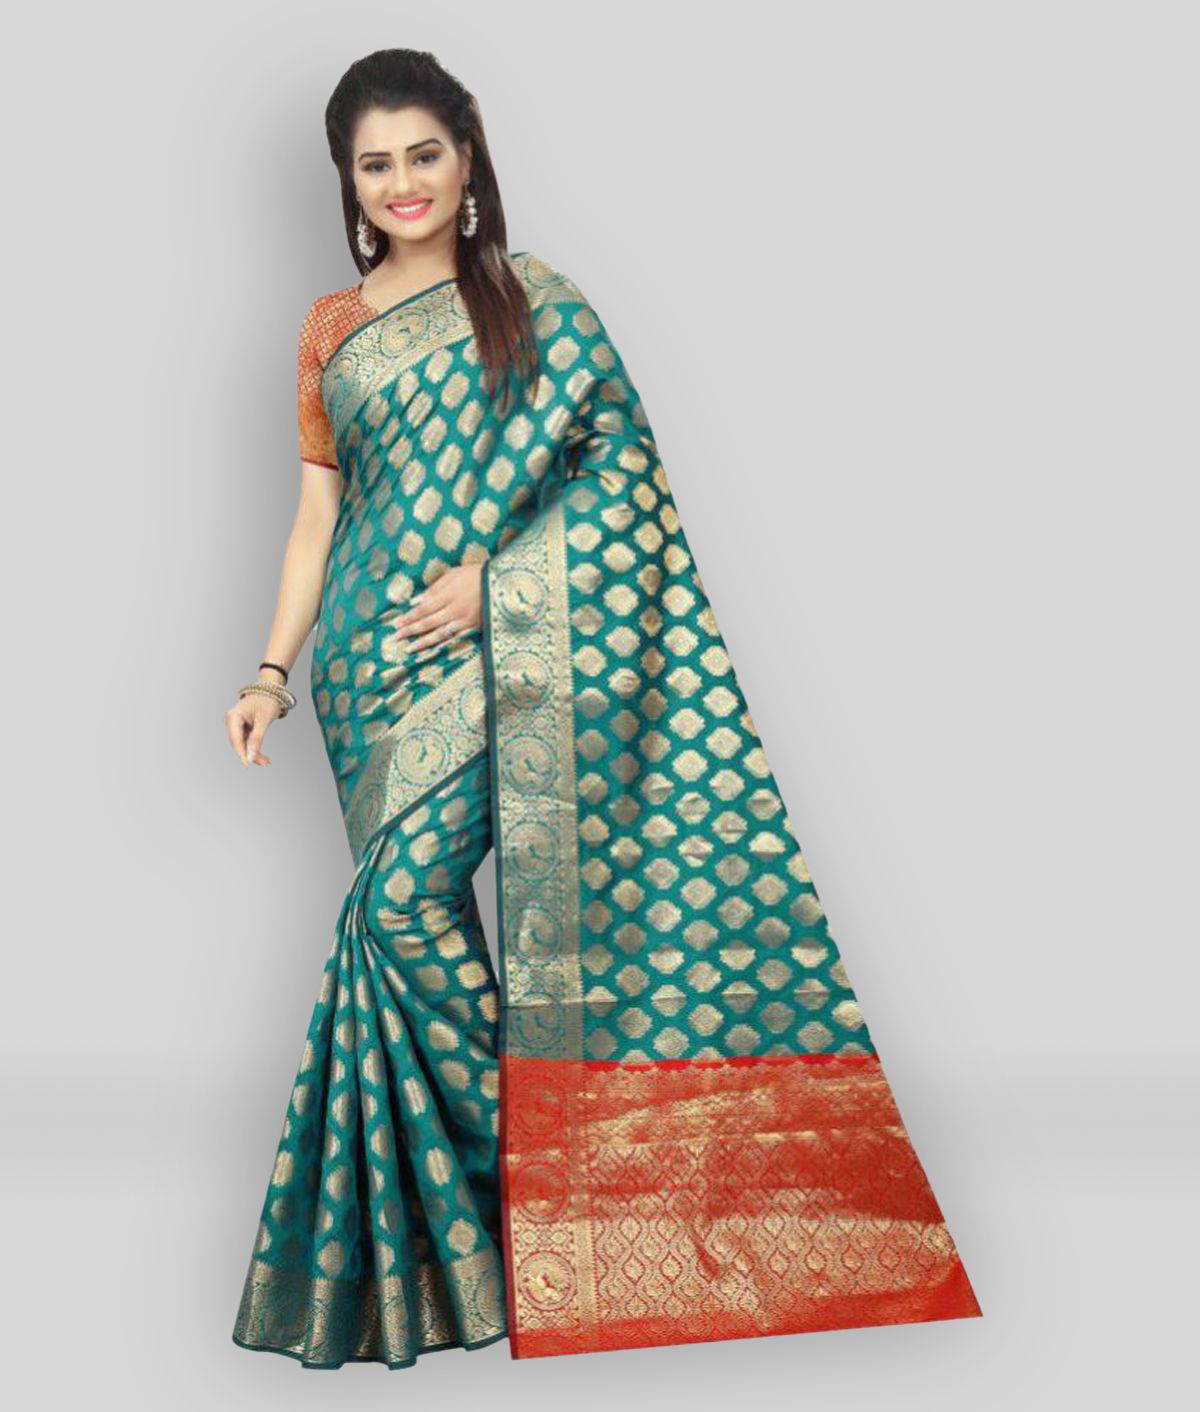     			Gazal Fashions - Multicolor Silk Saree With Blouse Piece ( Pack of 1 )